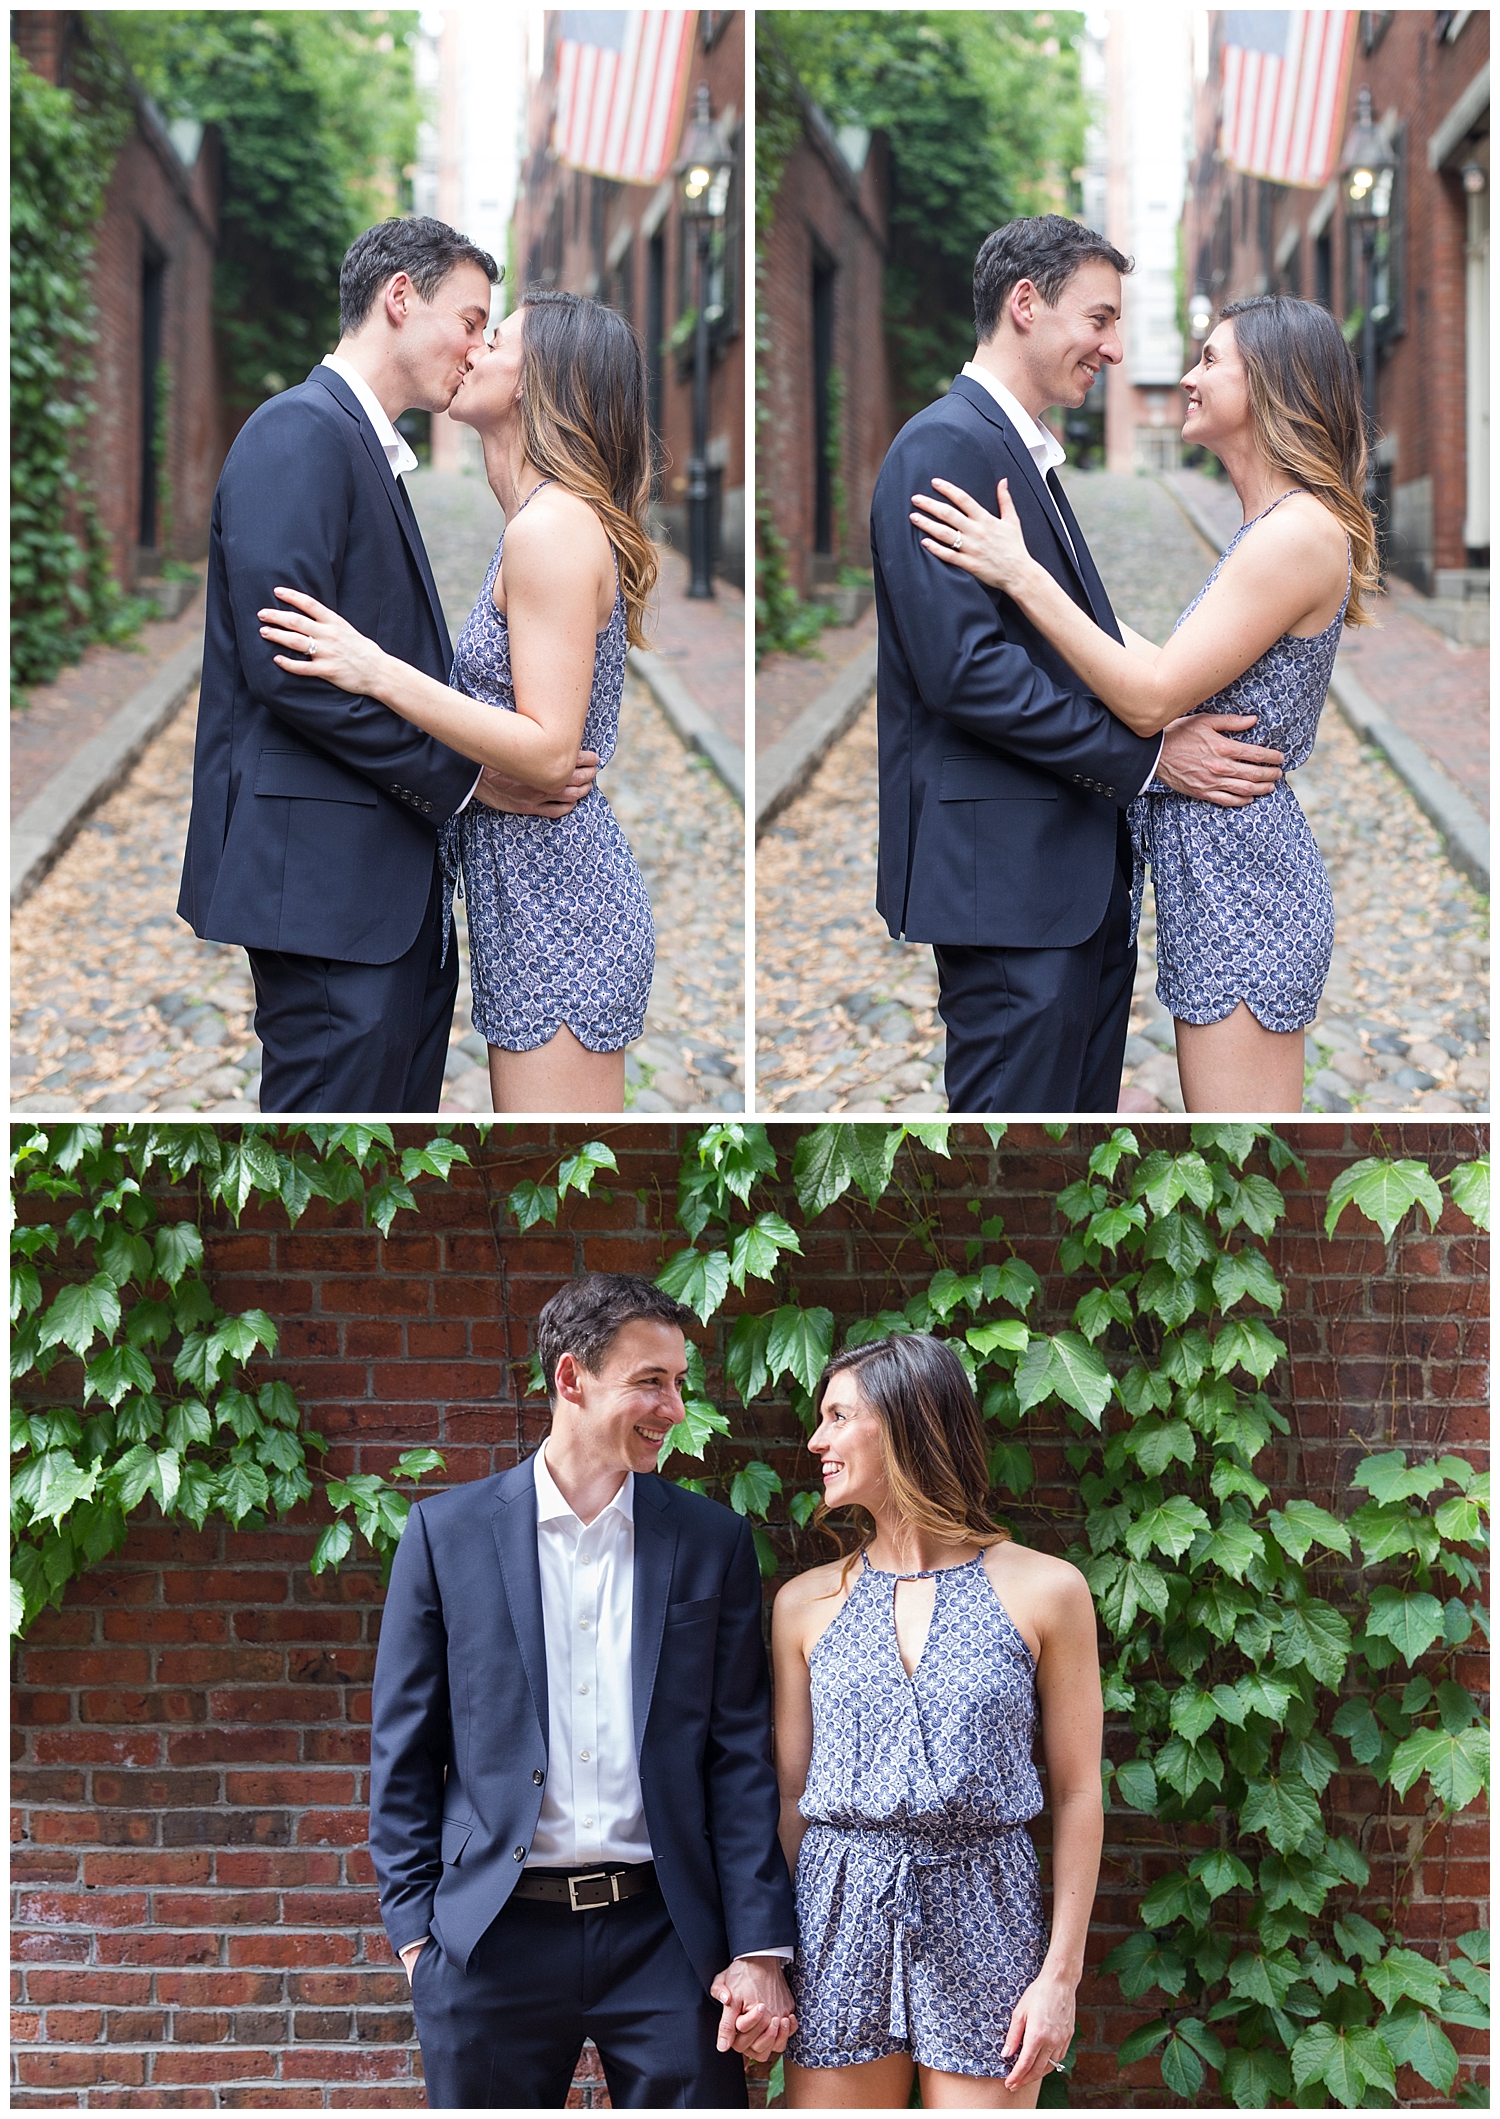 Beacon Hill Boston Engagement Session on Acorn Street, with photography by Halie Olszowy.